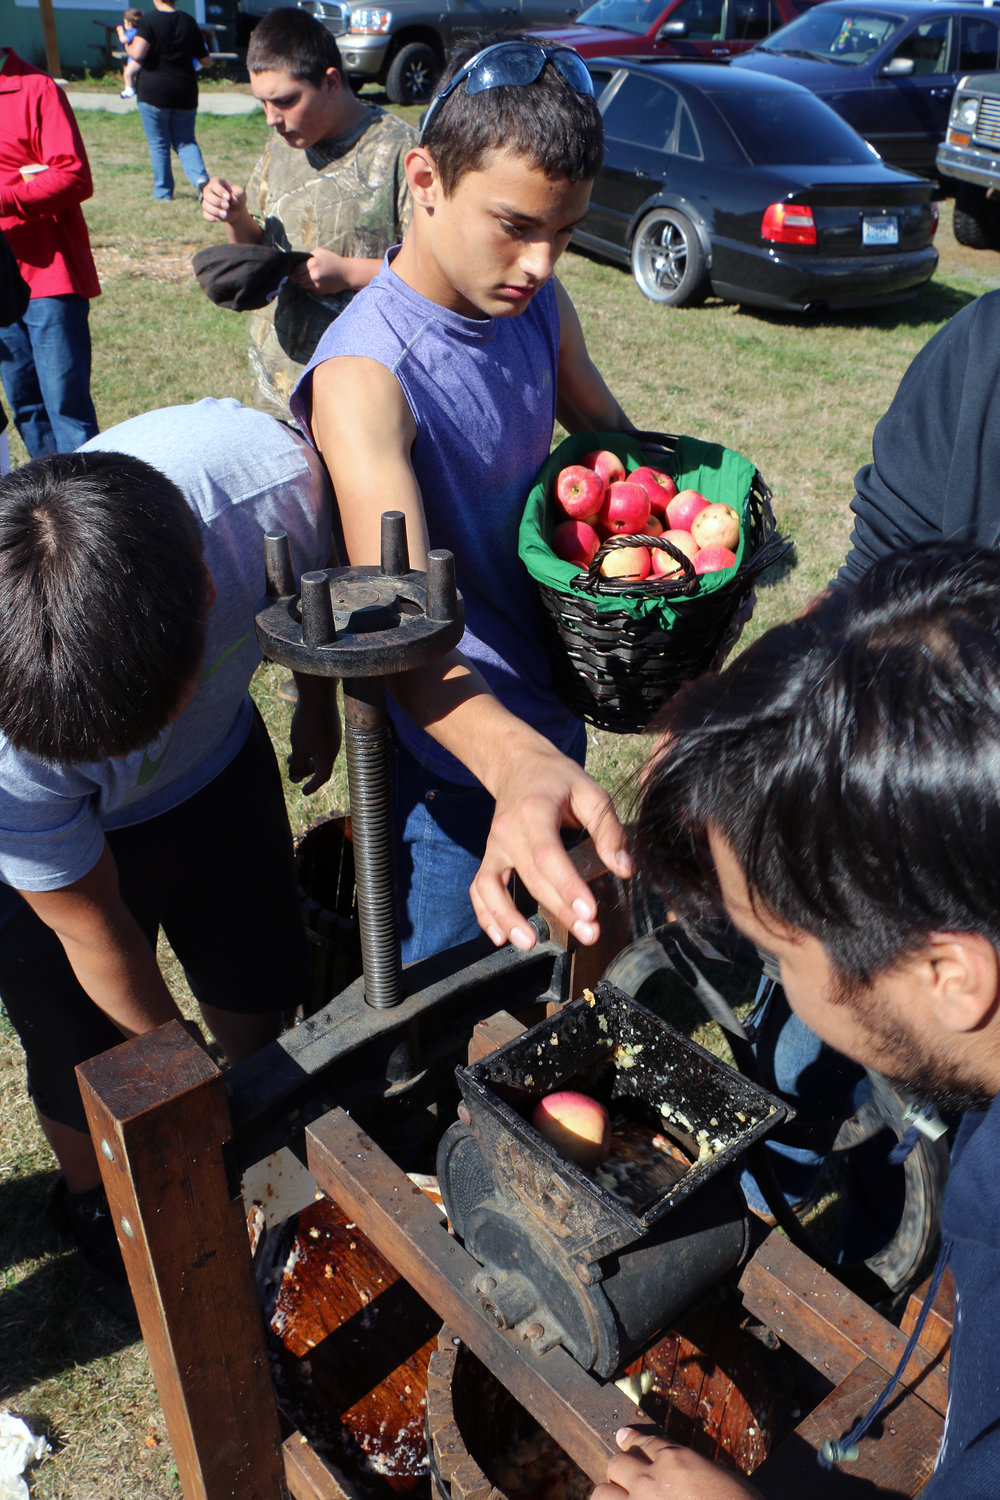 In this Oct. 3, 2015 file photo, members of the Onalaska Football team worked the apple cider press on Saturday at the Apple Harvest Festival in Onalaska. People were able to bring their apples, which were turned into cider through a labor-intensive process on the press.